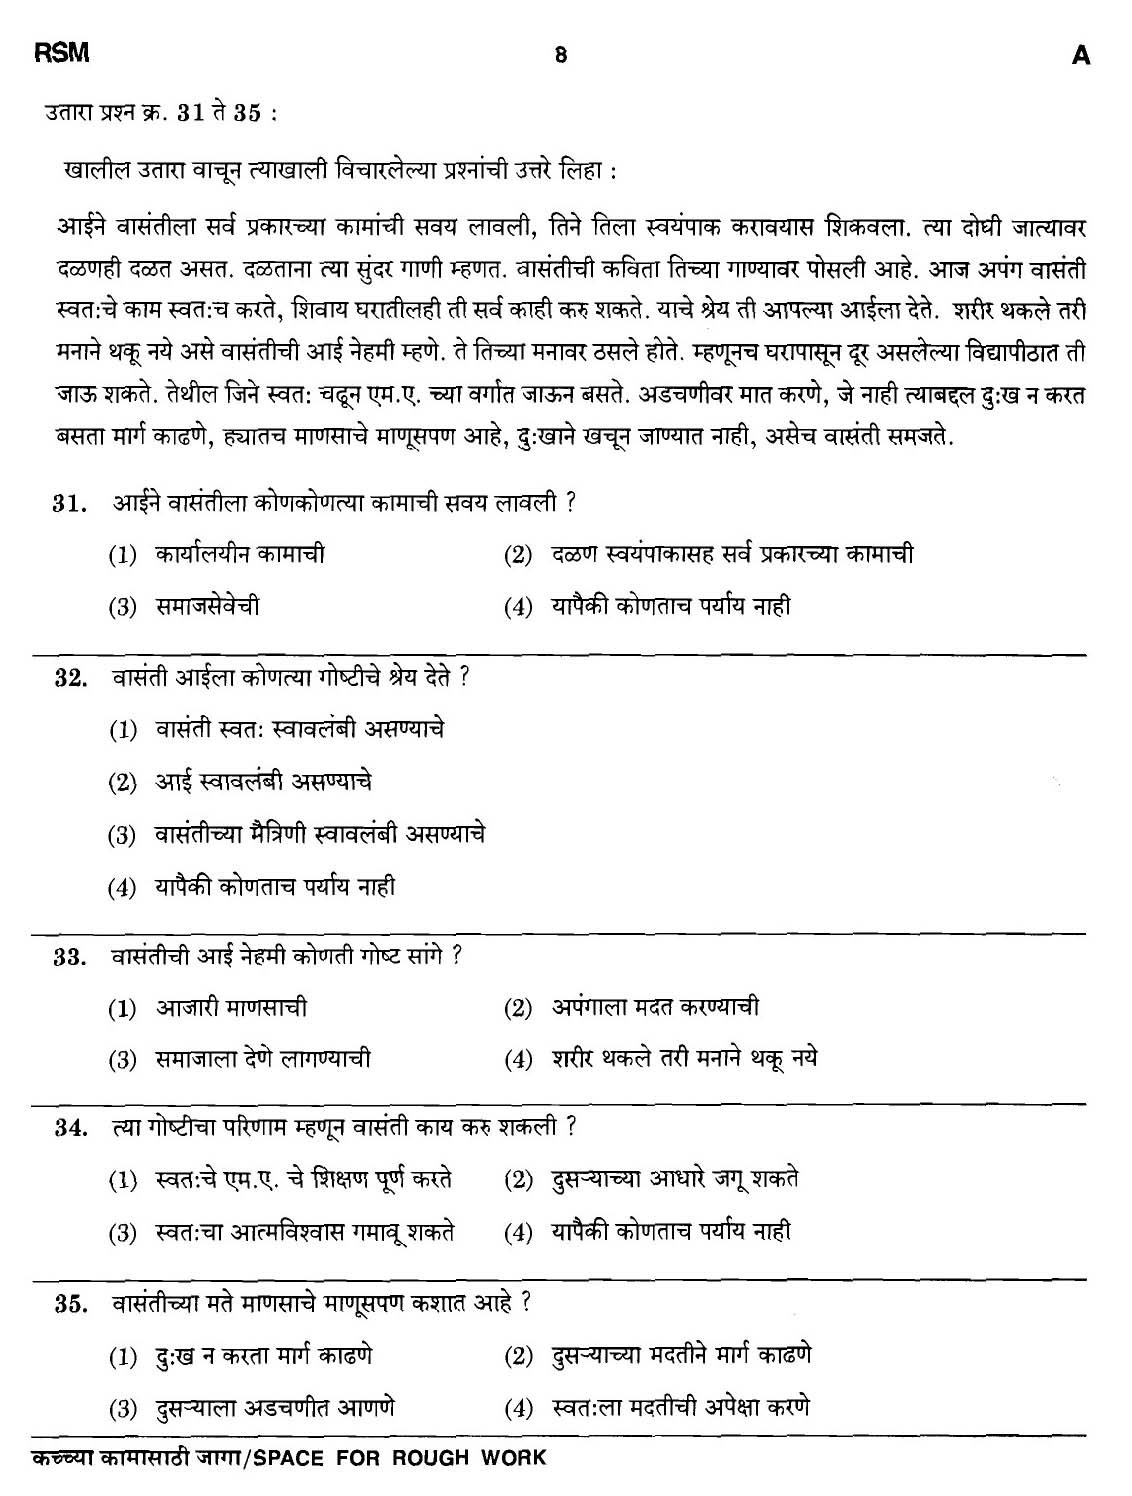 MPSC Agricultural Services Preliminary Exam 2011 Question Paper 7